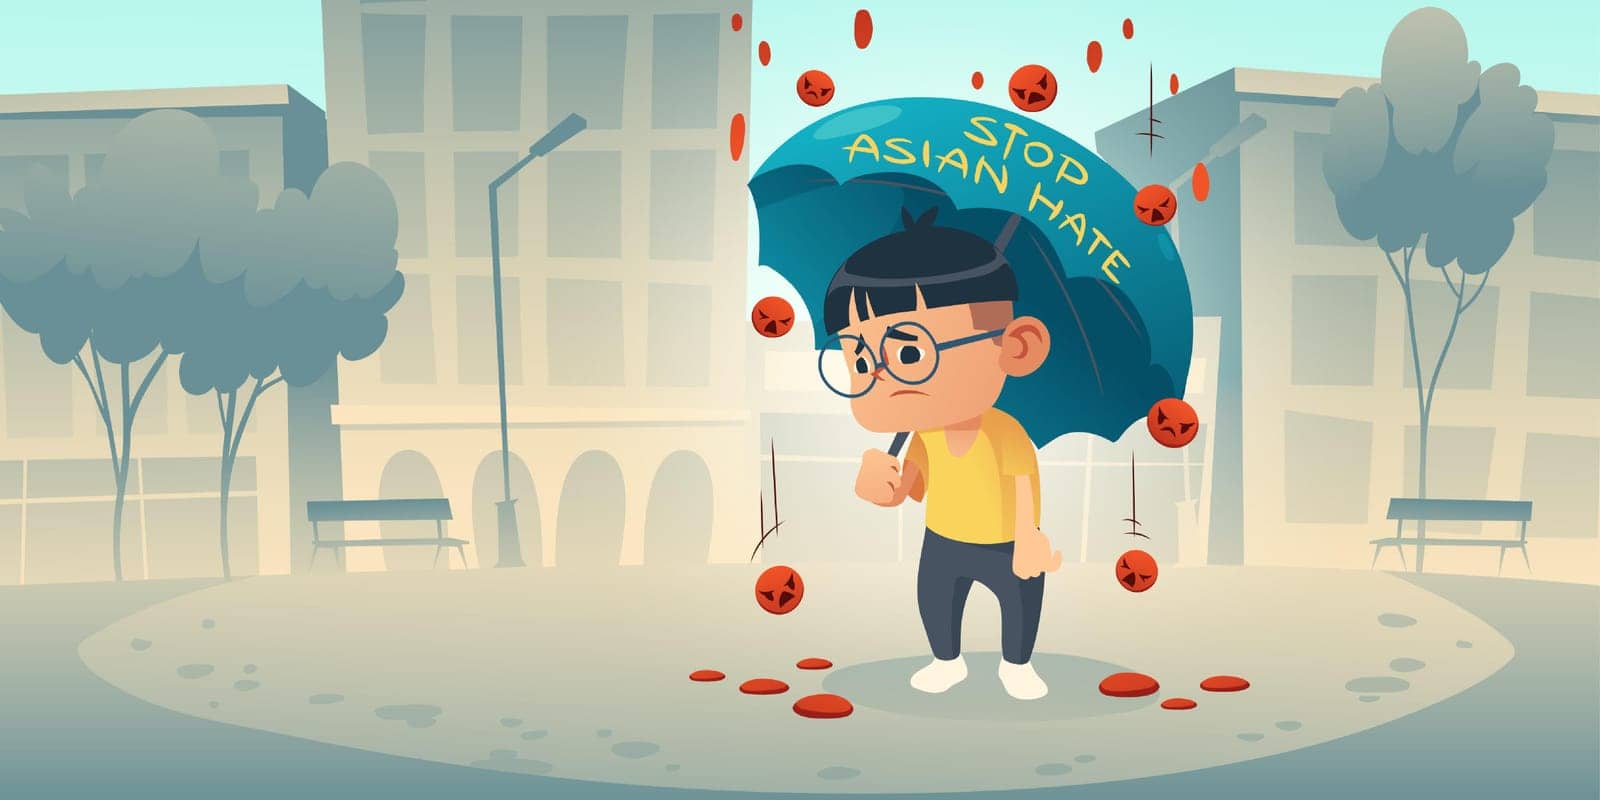 Stop Asian Hate appeal to support community of Asia during covid19 pandemic. Cartoon poster with sad chinese boy stand under rain of falling angry emoji. Racism, bullying and violence vector concept